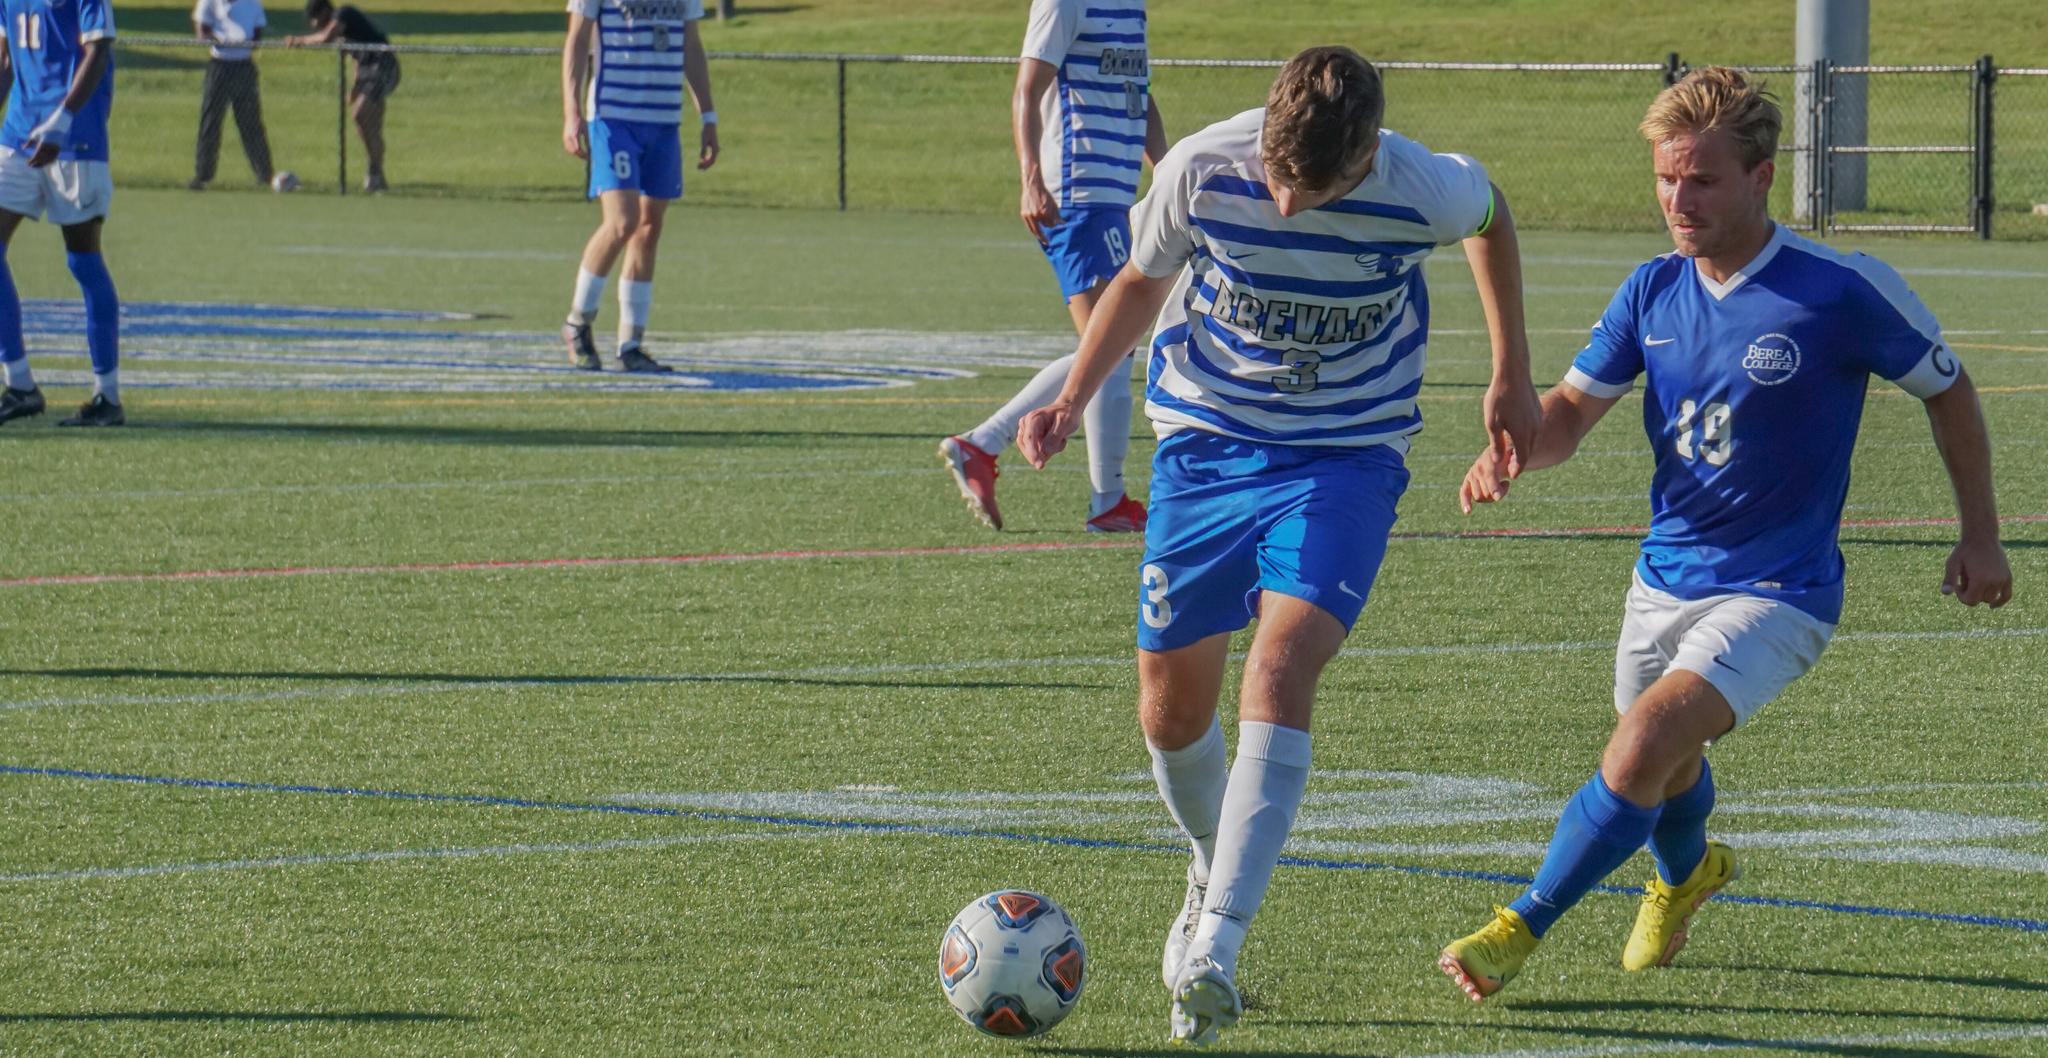 O’Callaghan Finds Morgan for Game-Winner, Tornados Win Sixth Straight Match